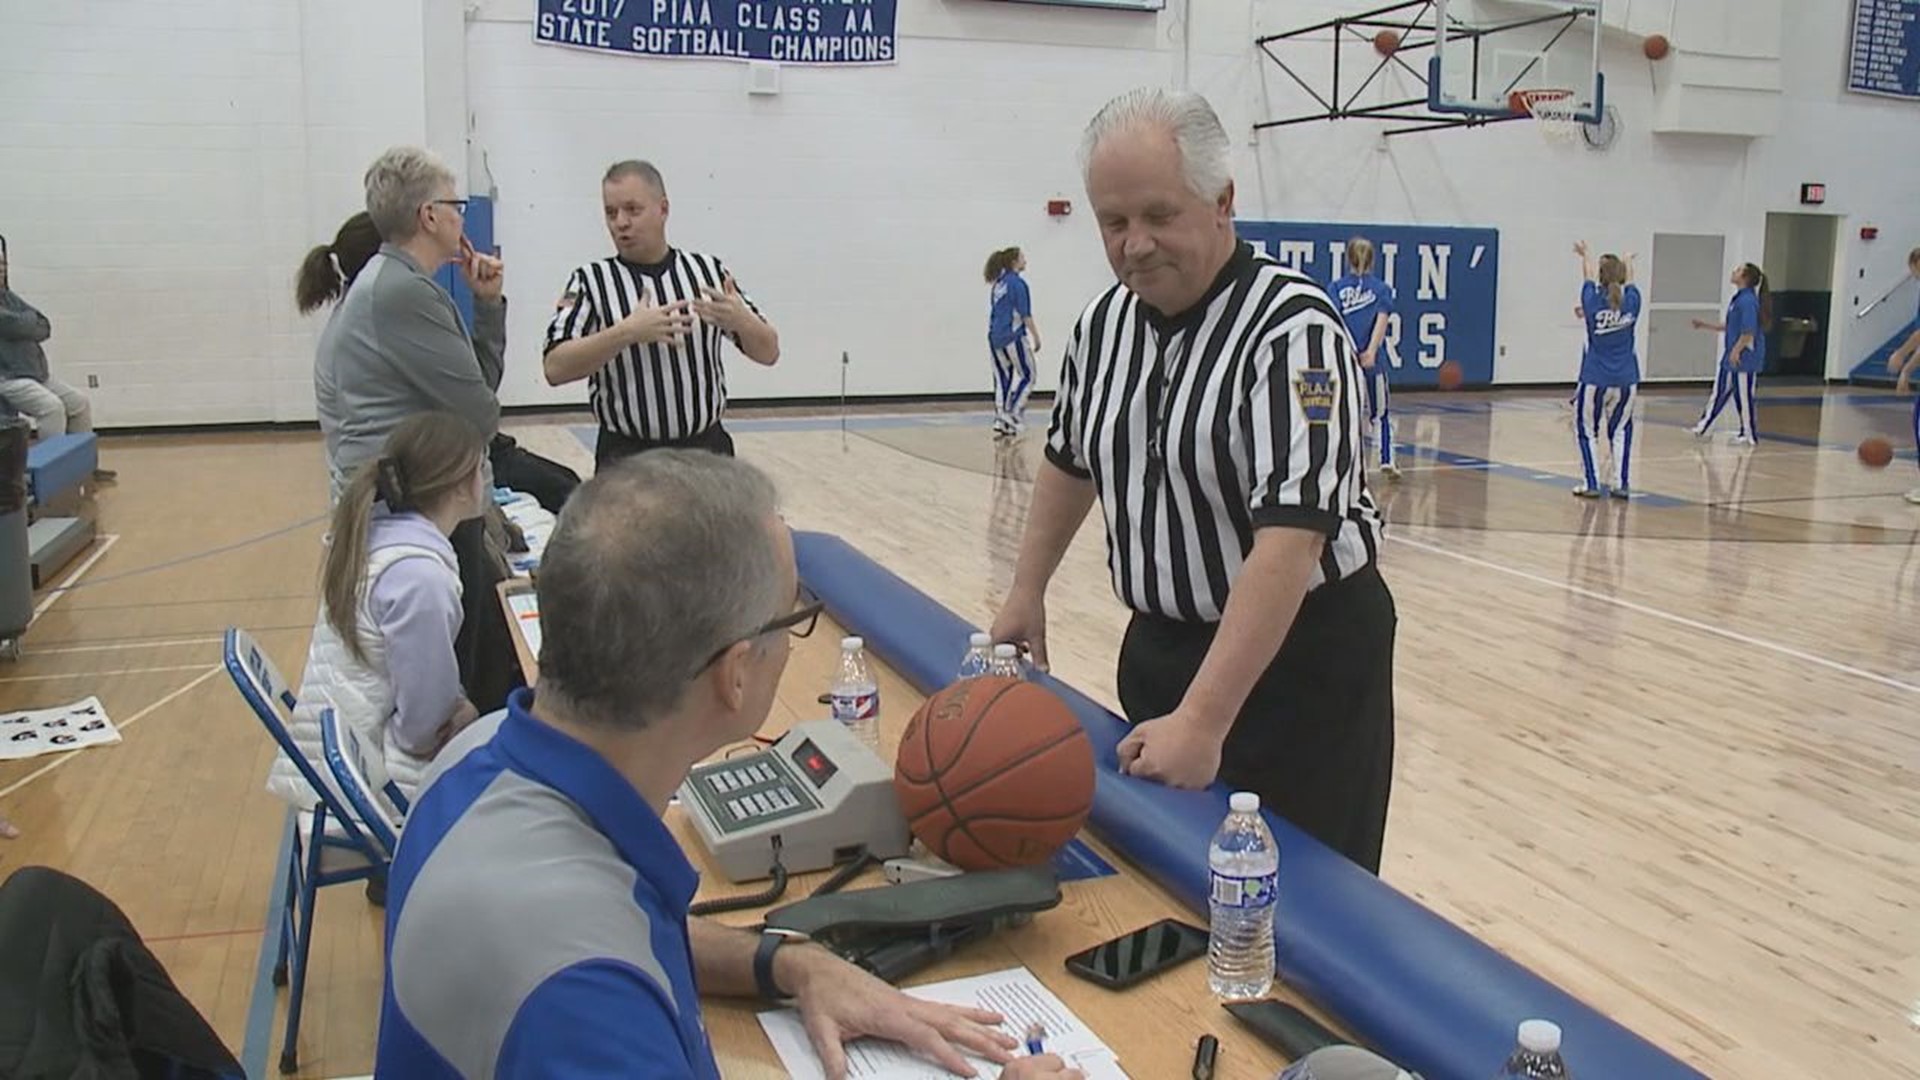 Joe Gerchak: Nearly Five Decades of Officiating in Schuylkill County